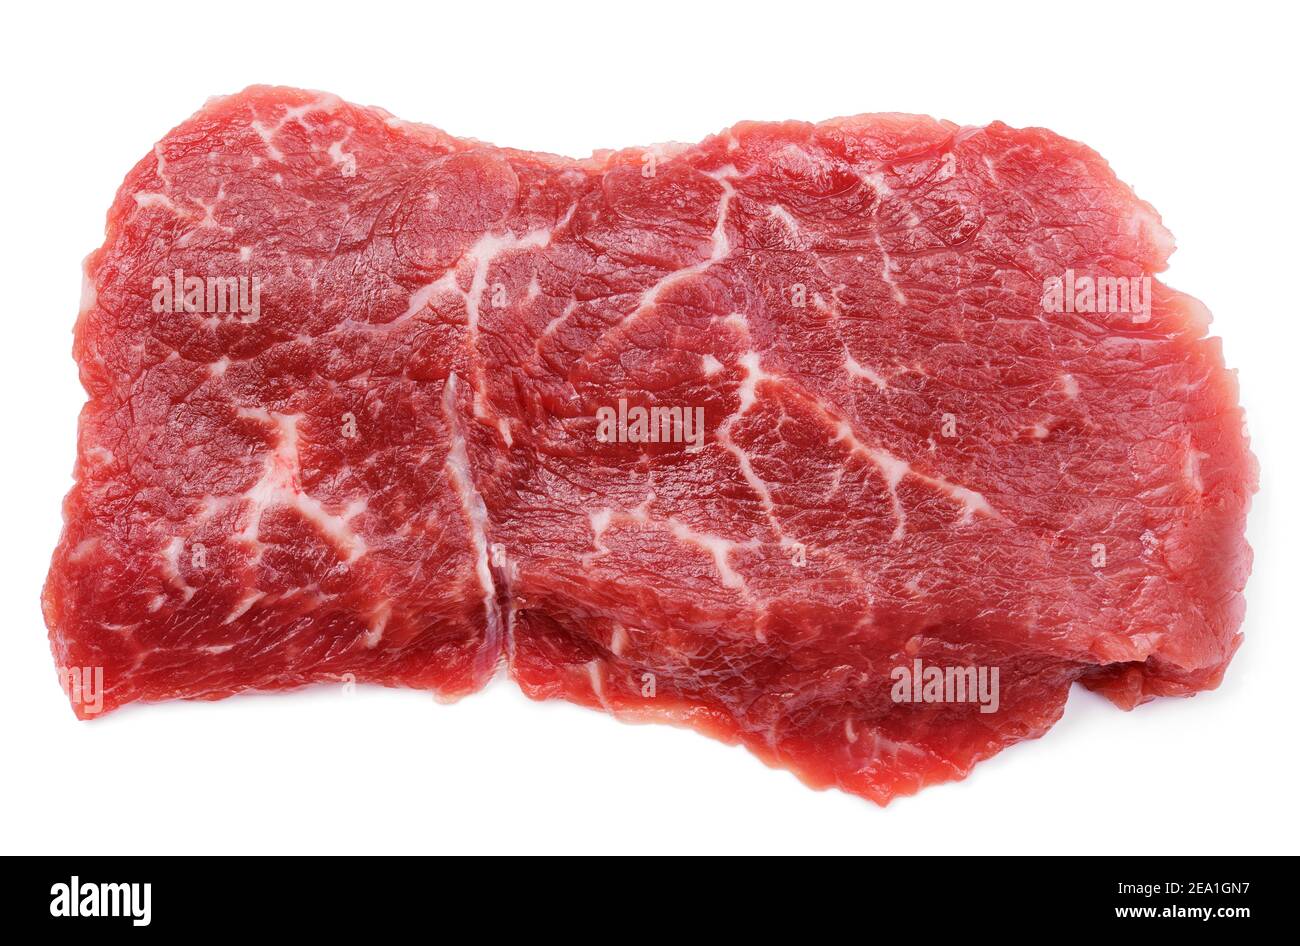 Top view of fresh raw beef steak isolated on white background Stock Photo